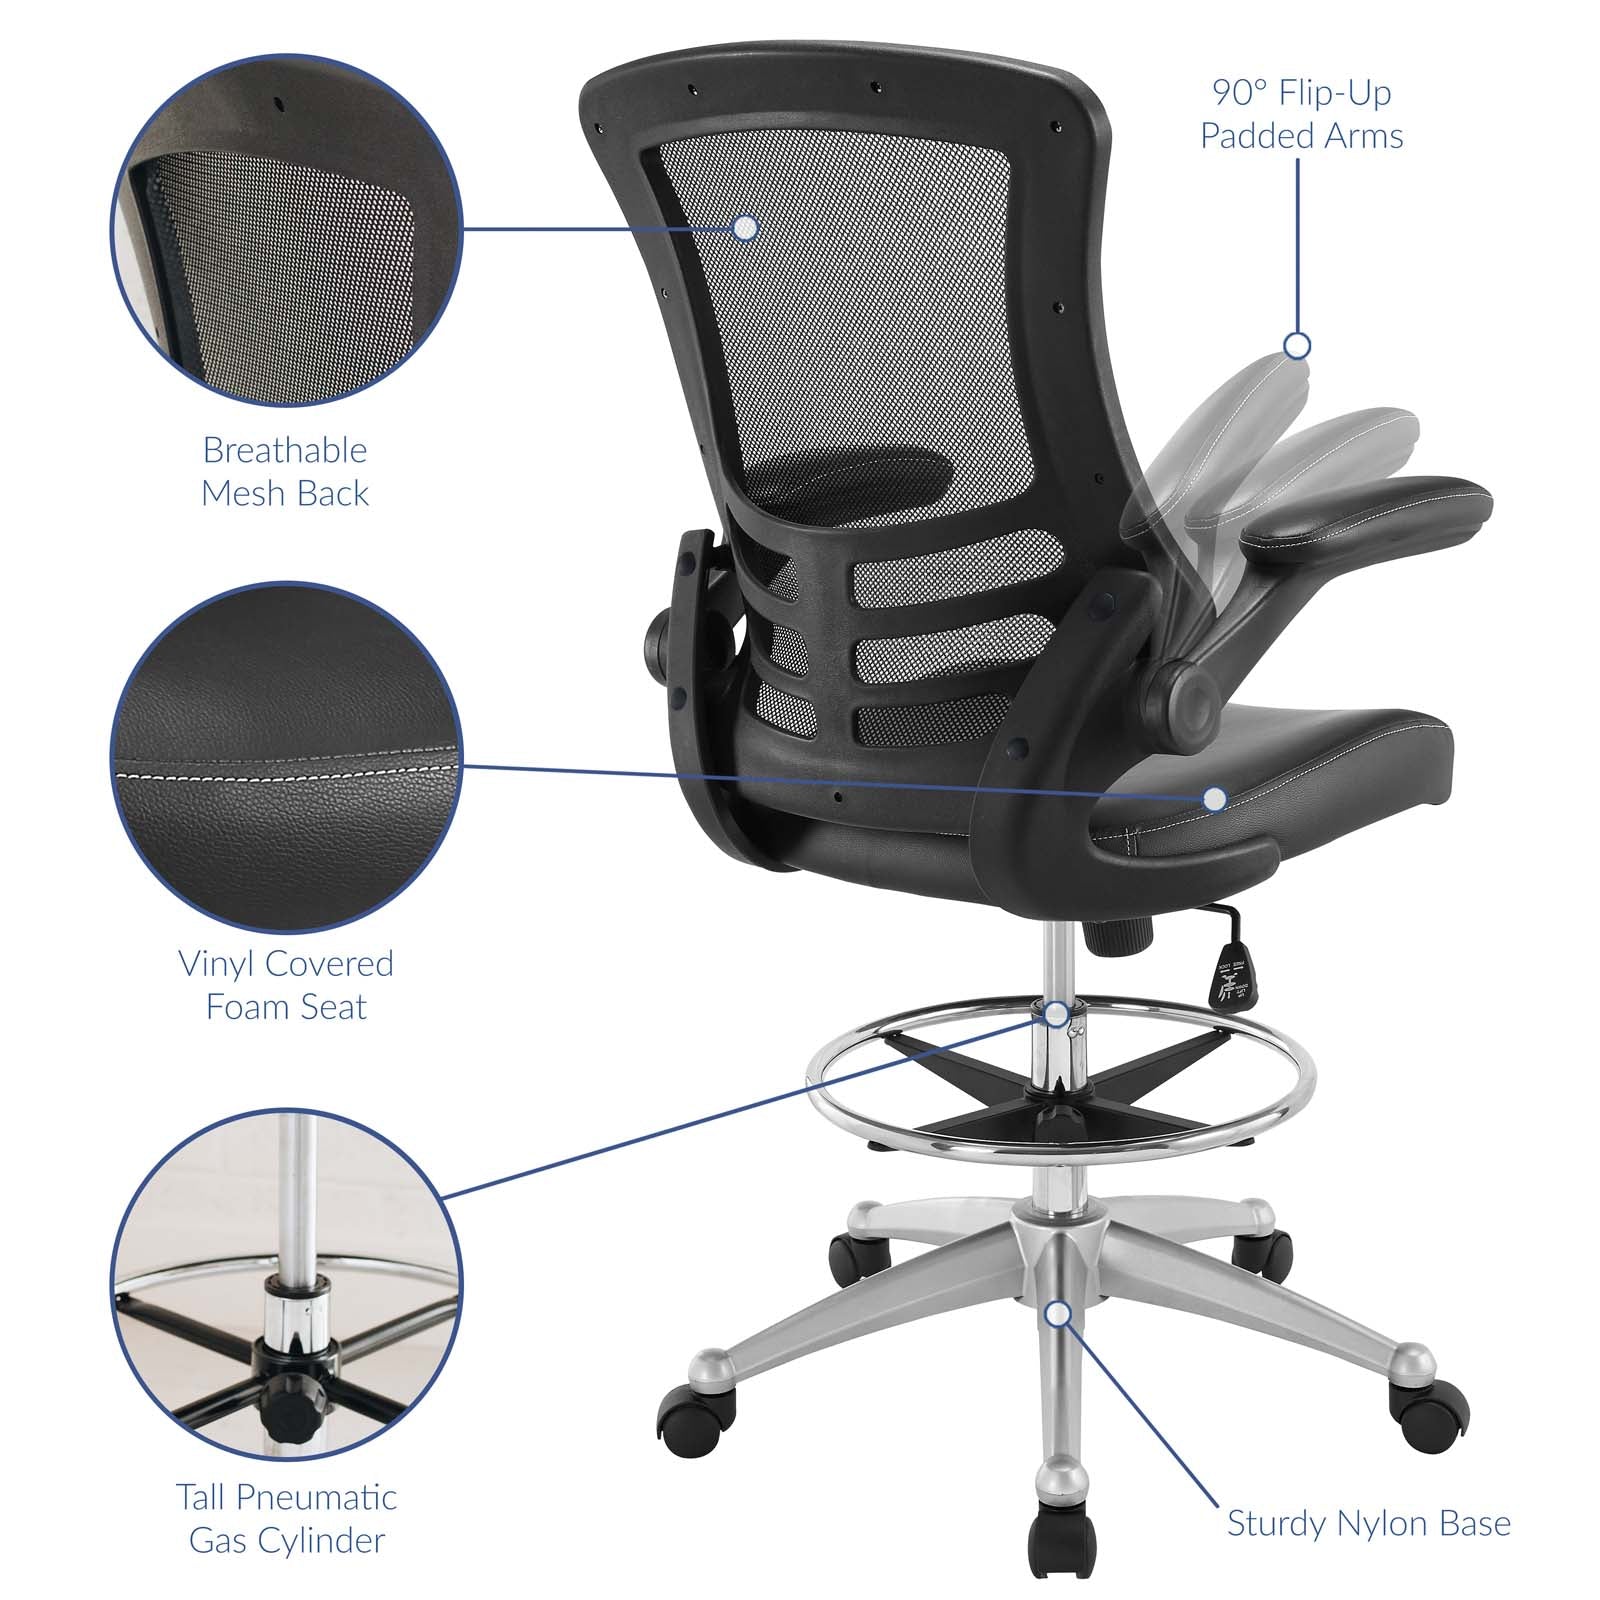 Modway Task Chairs - Attainment Vinyl Drafting Chair Black